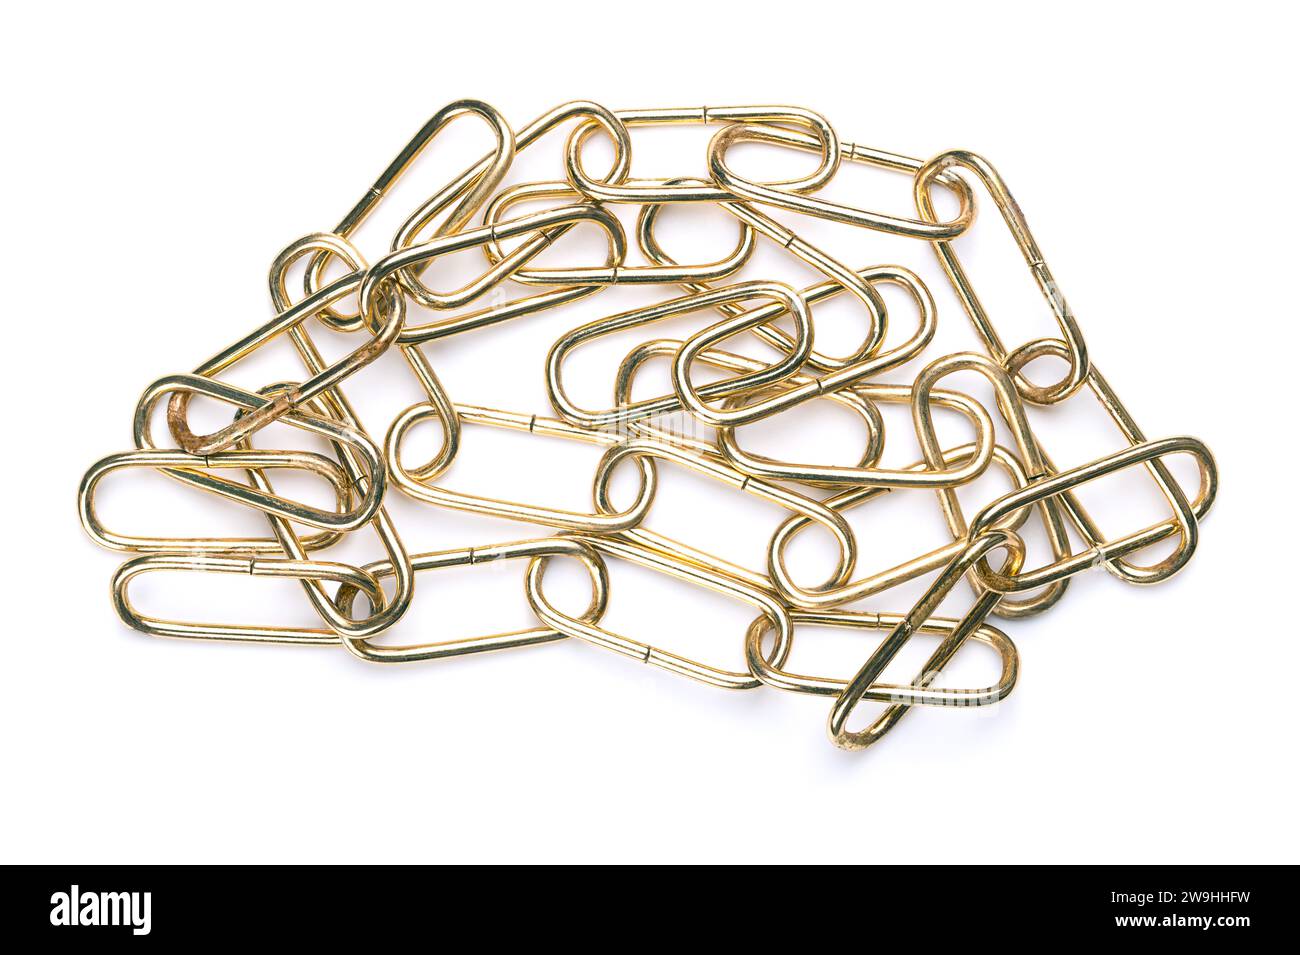 Steel chain with shiny, brass plated surface, straight shaped, with rounded links, from above. Smooth and decorative ring chain, made of round wire. Stock Photo